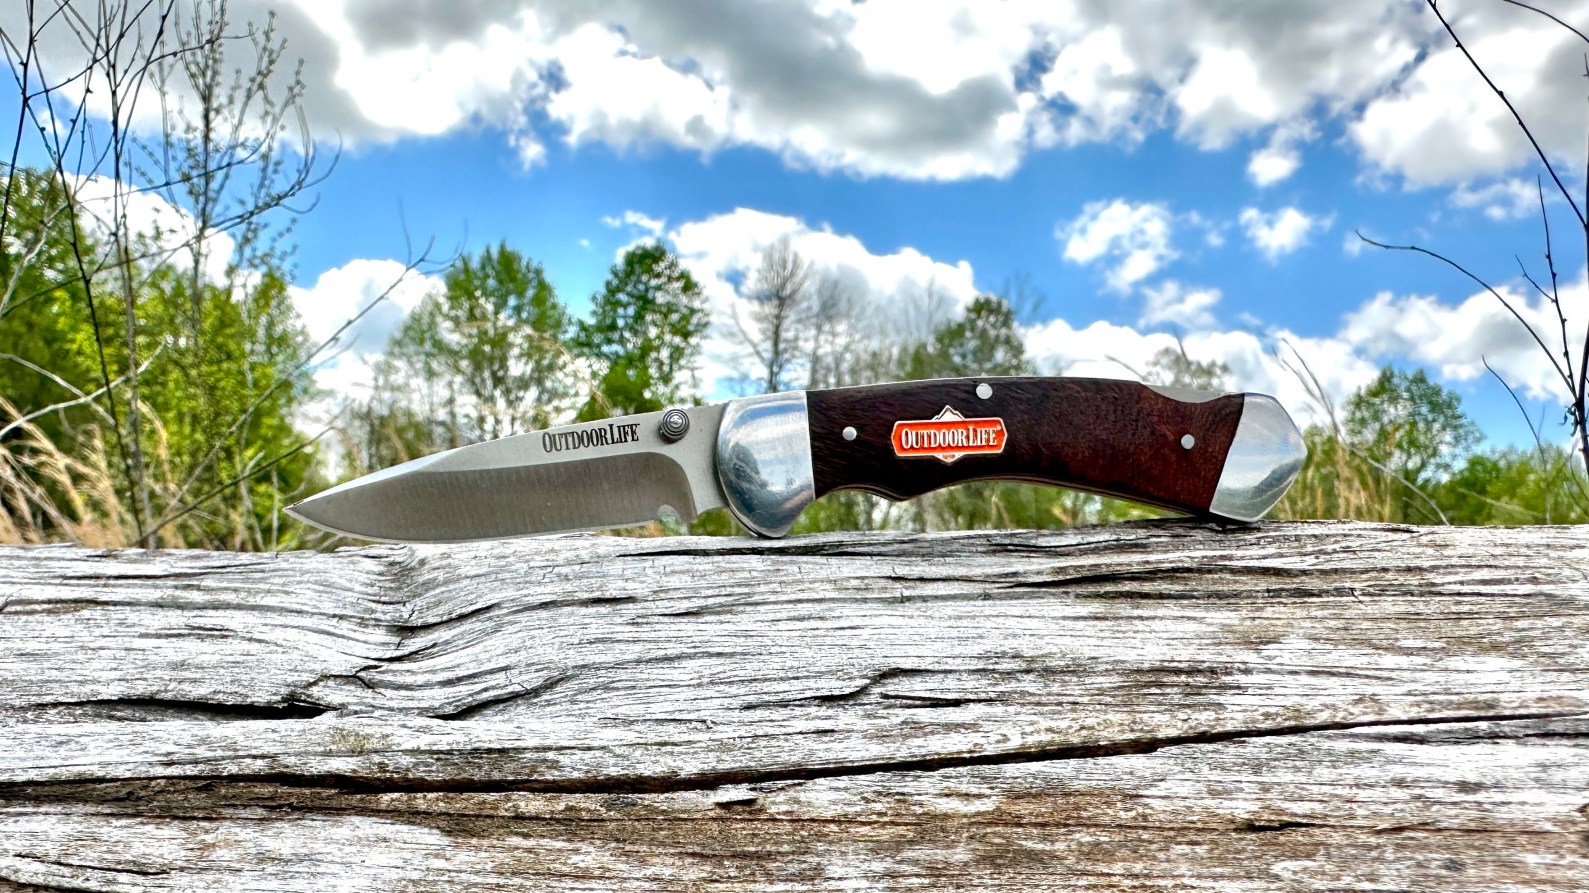 We launched the Outdoor Life knife collection.